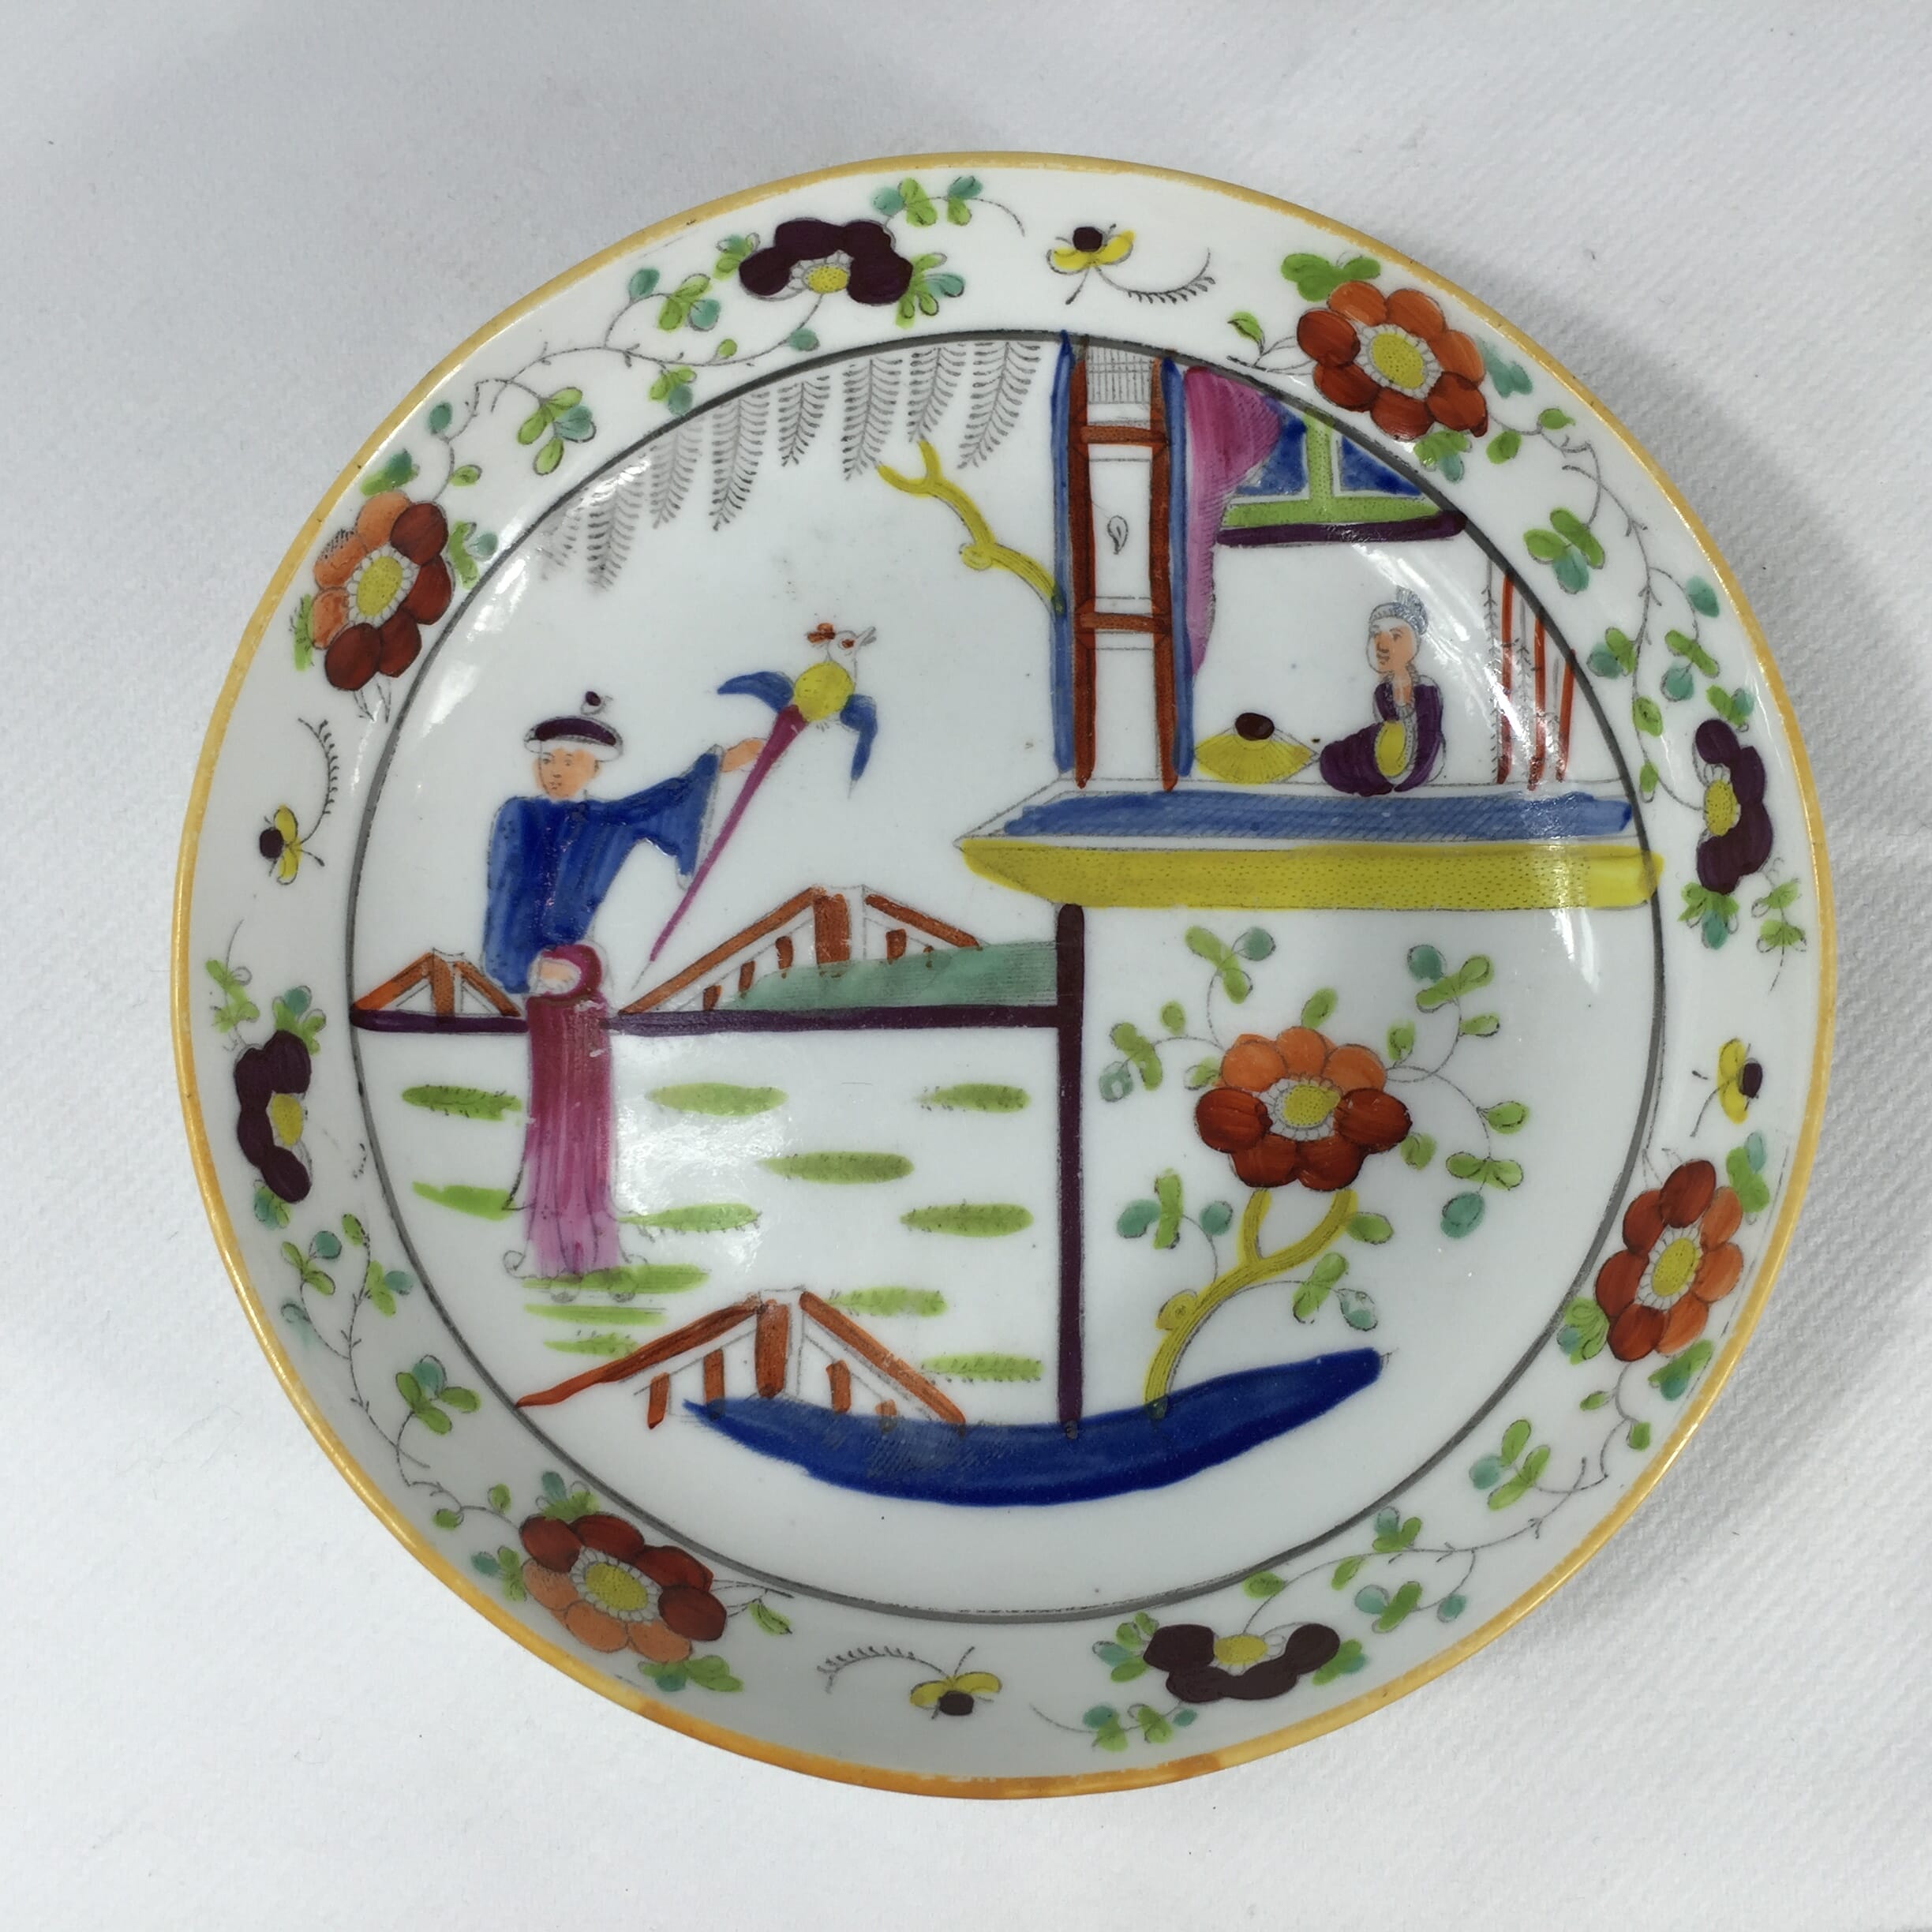 Newhall saucer, Chinoiserie clobbered pattern 1040, c. 1805-0